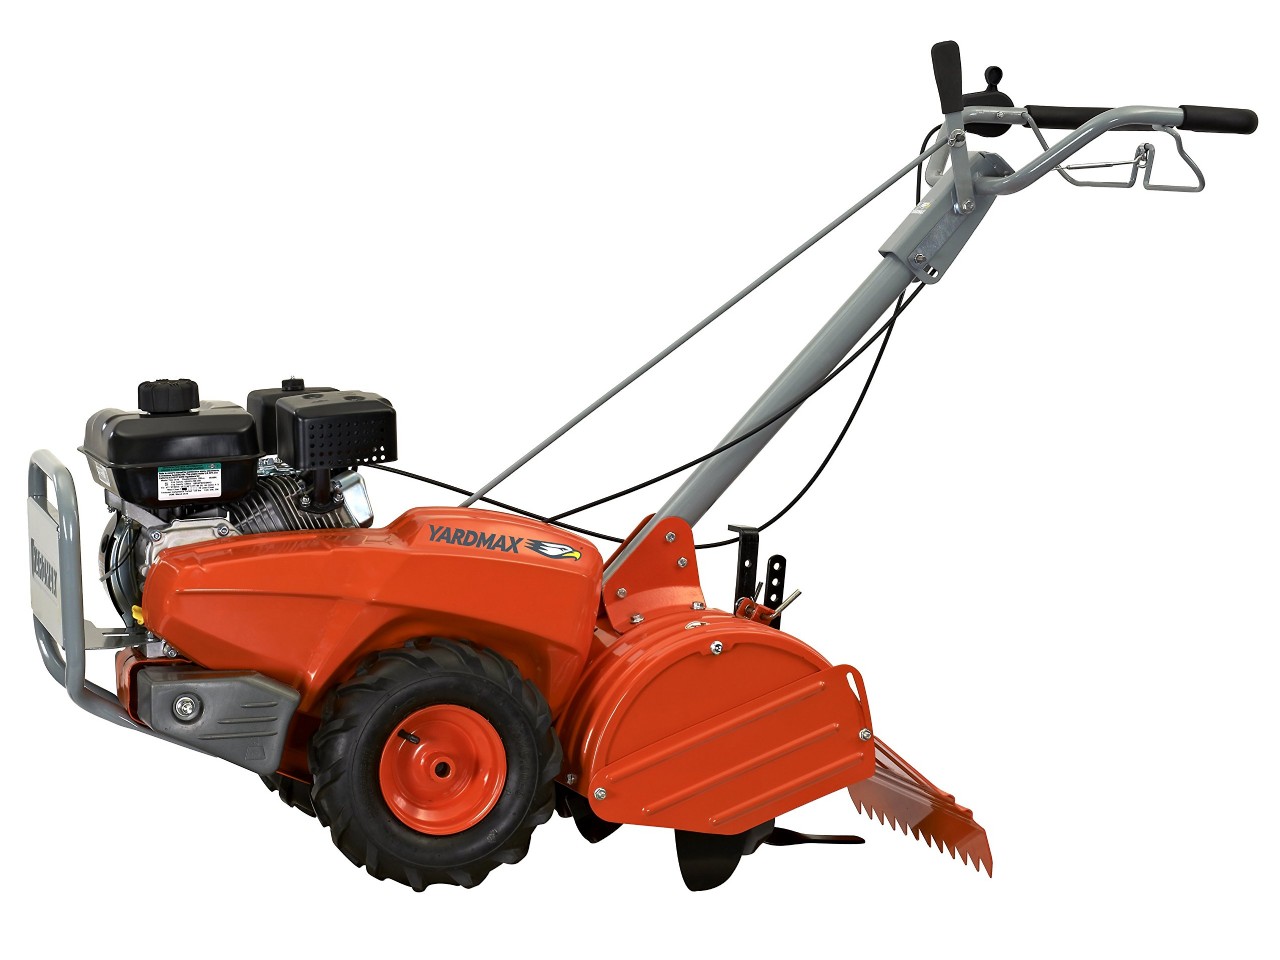 features and benefits of the Yardmax rototiller